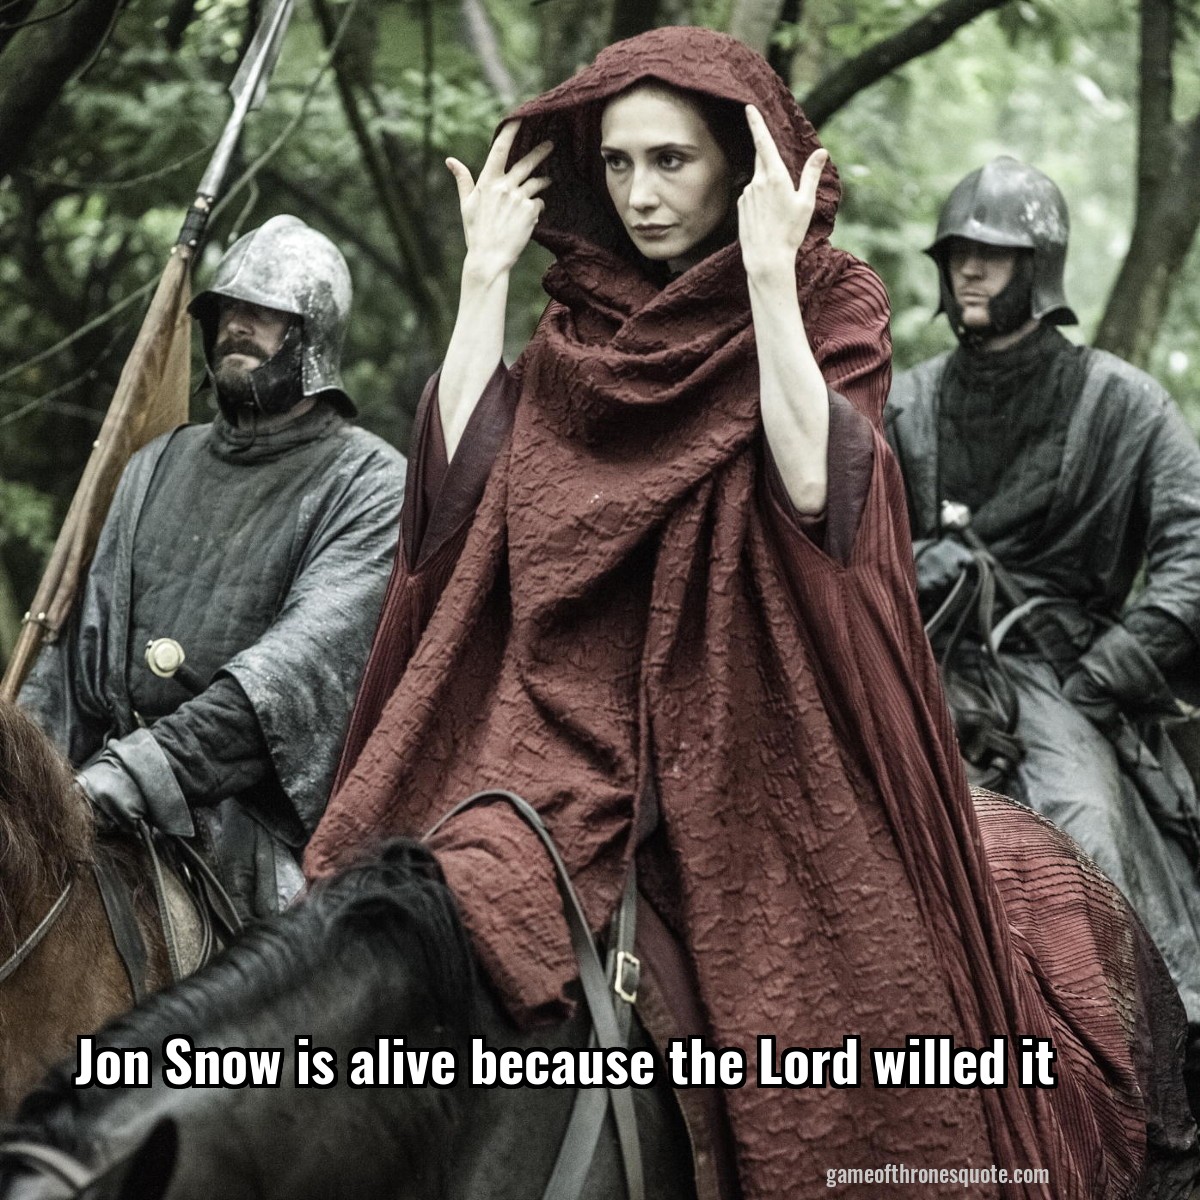 Jon Snow is alive because the Lord willed it